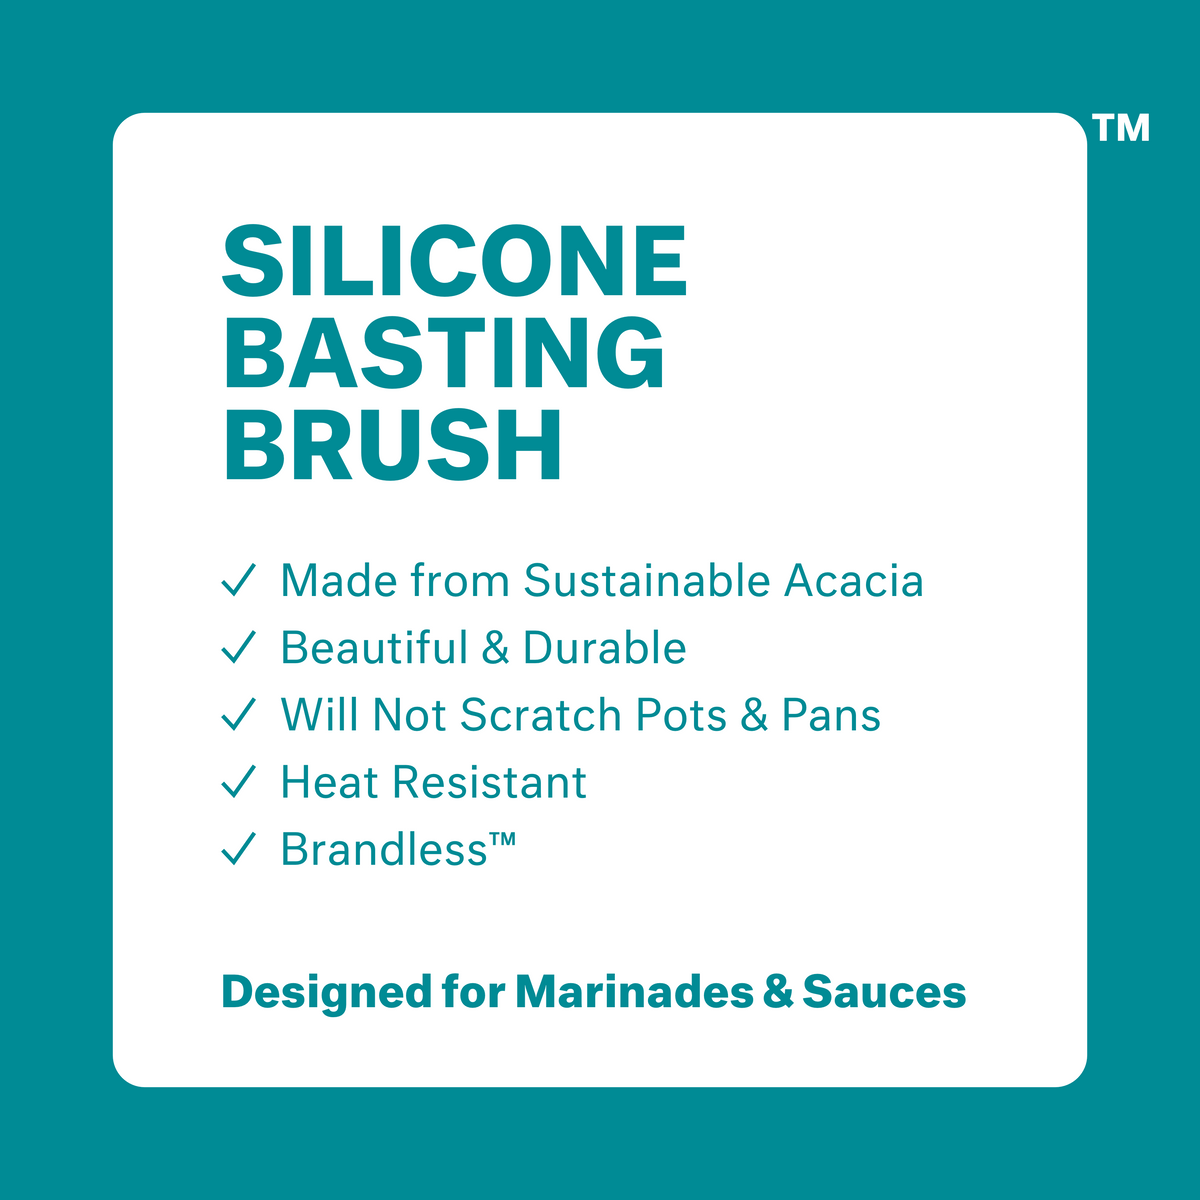 Silicone basting brush: made from sustainable acacia, beautiul &amp; durable, will not scratch pots &amp; pans, heat resistant, brandless. Designed for marinades and sauces.